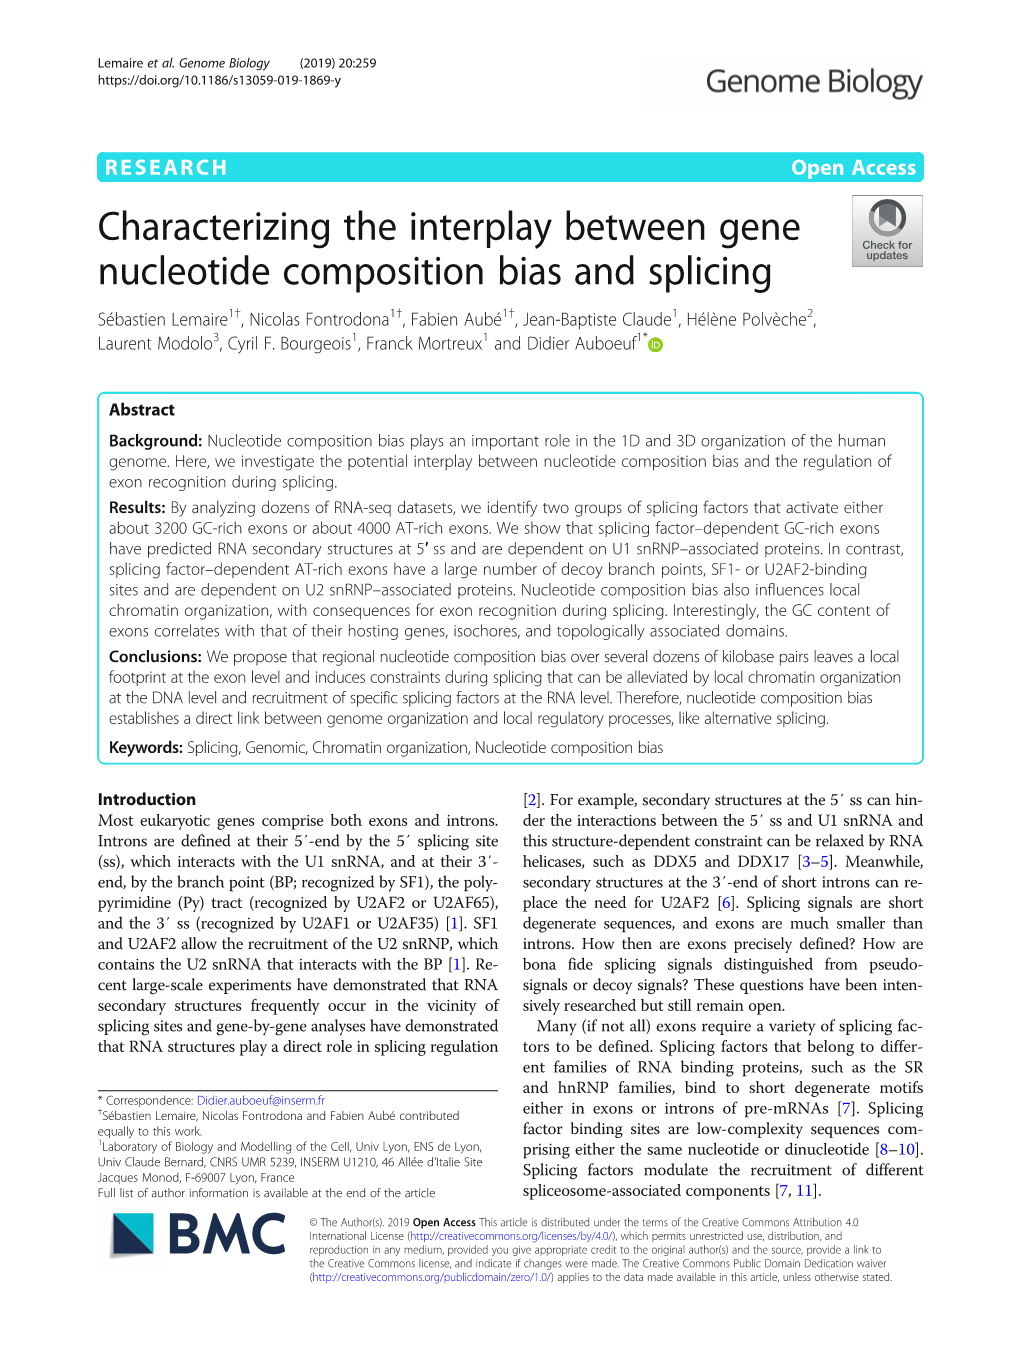 Characterizing the Interplay Between Gene Nucleotide Composition Bias